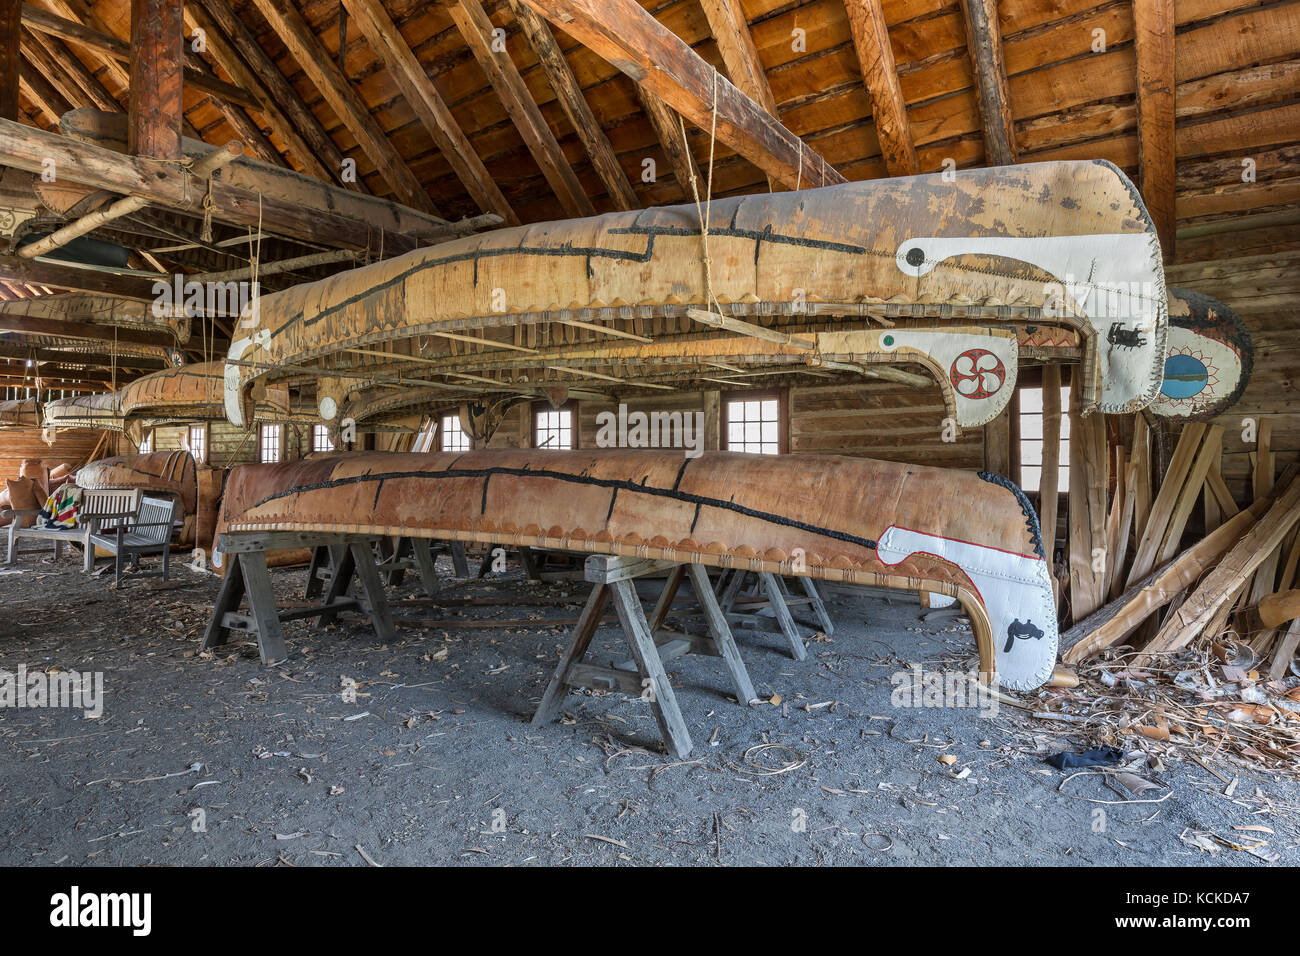 Birch bark canoes in the Canoe Shed building, Fort William Historical Park, Thunder Bay, Ontario, Canada. Stock Photo